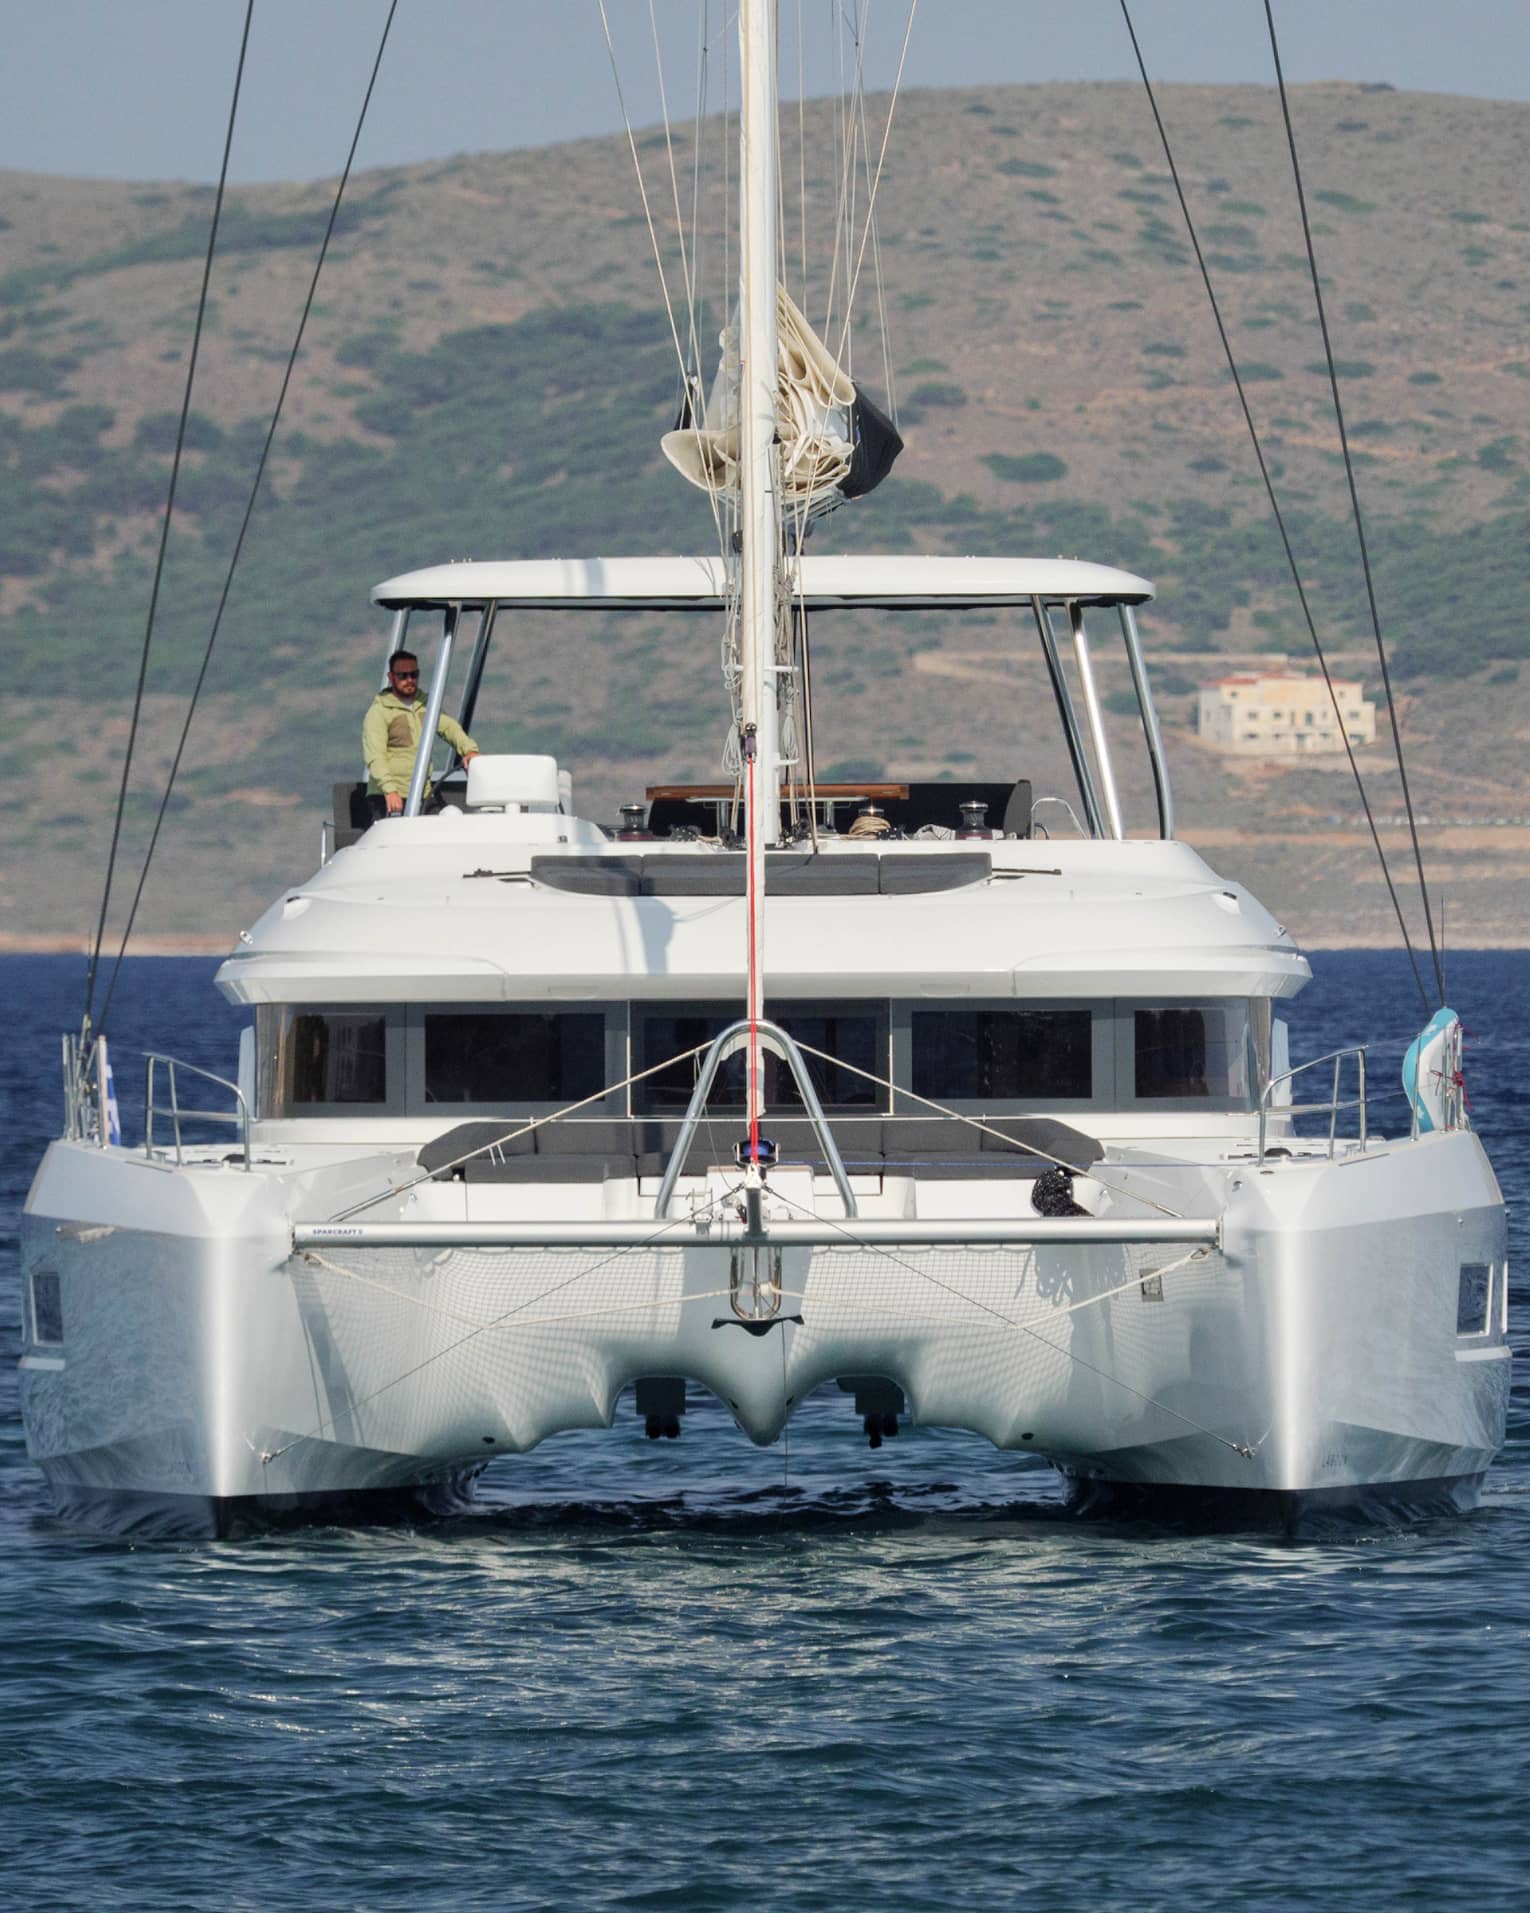 Stern view of luxury sailboat in blue water with captain at helm